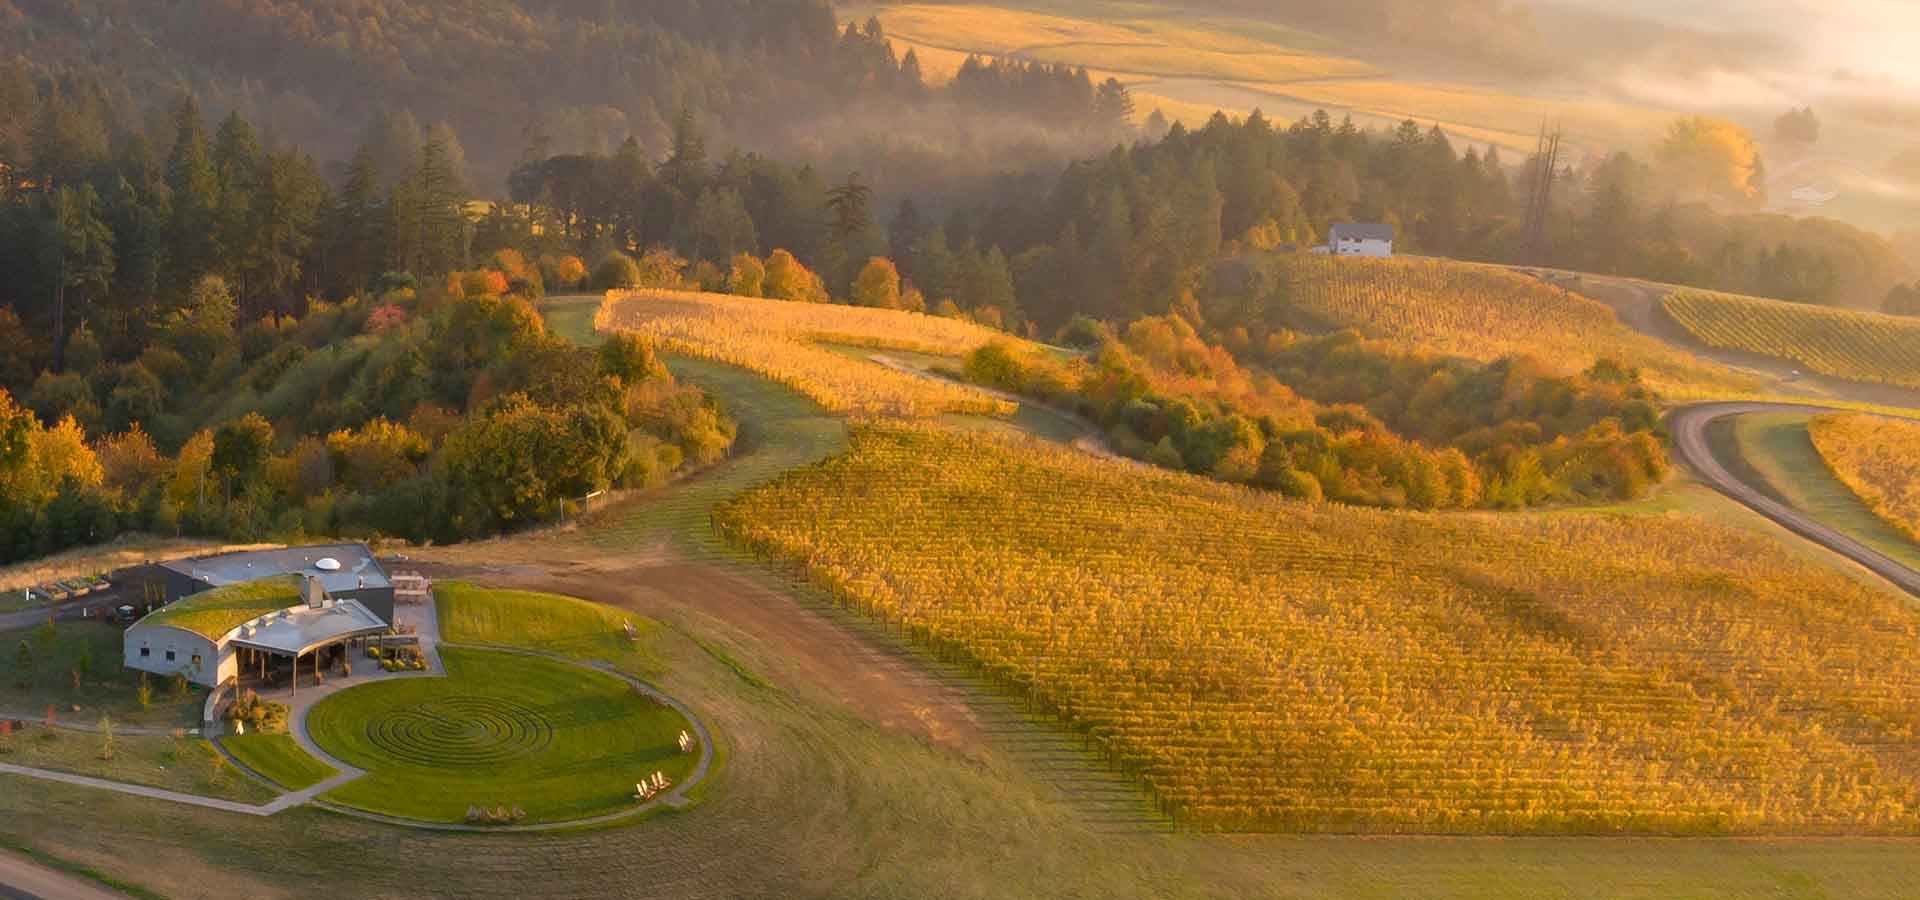 Fairsing Vineyard at dawn surrounded by golden vines following harvest in Oregon's Willamette Valley